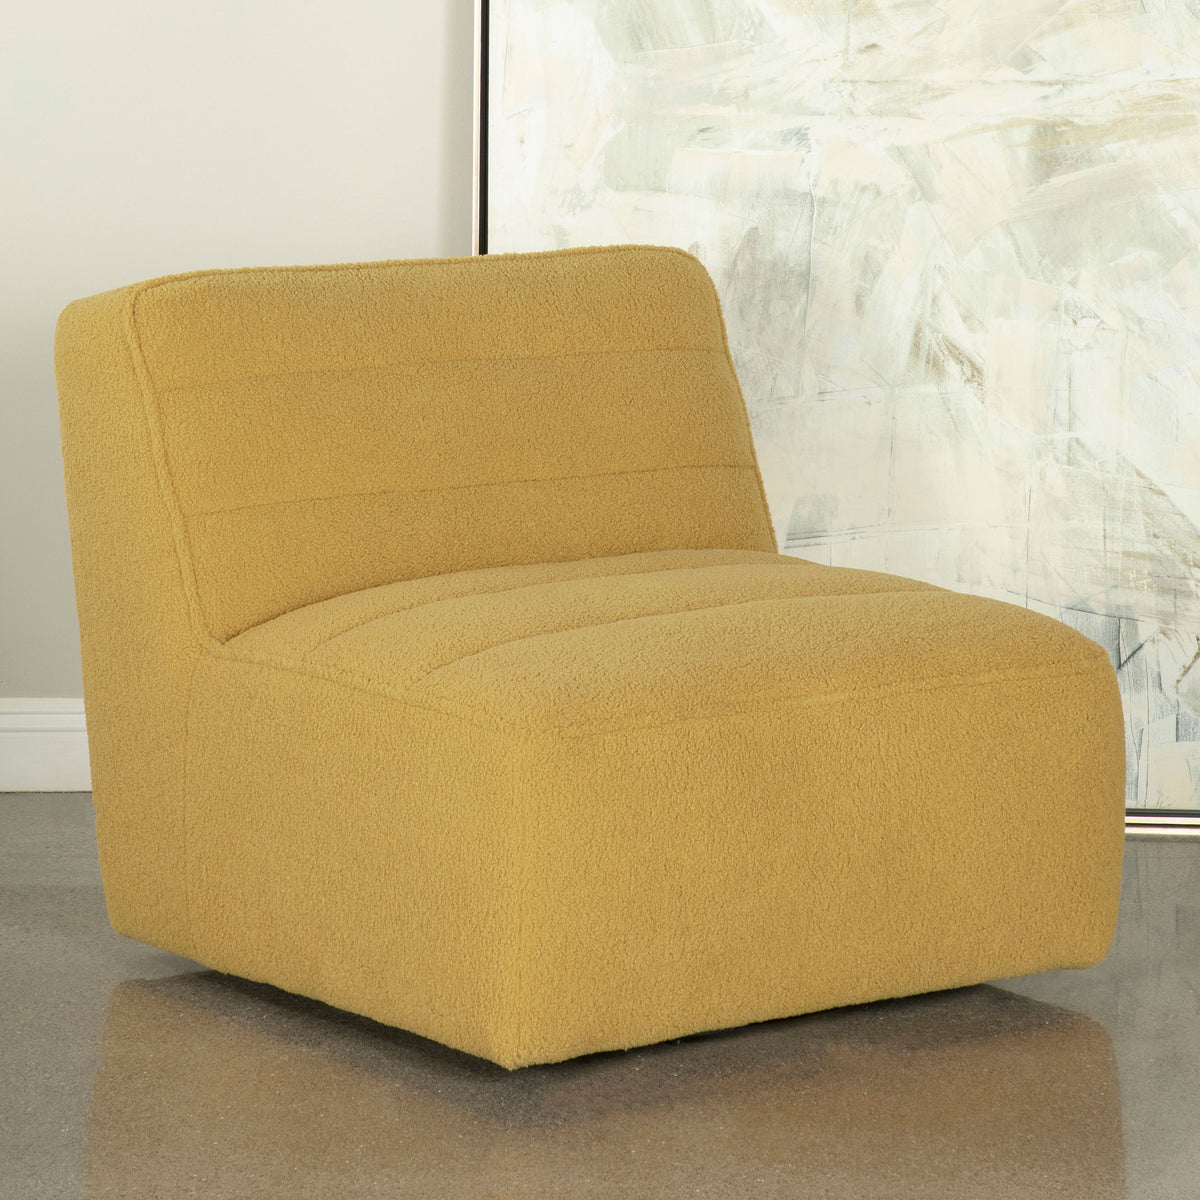 Cobie Upholstered Swivel Armless Chair Cobie Upholstered Swivel Armless Chair Half Price Furniture